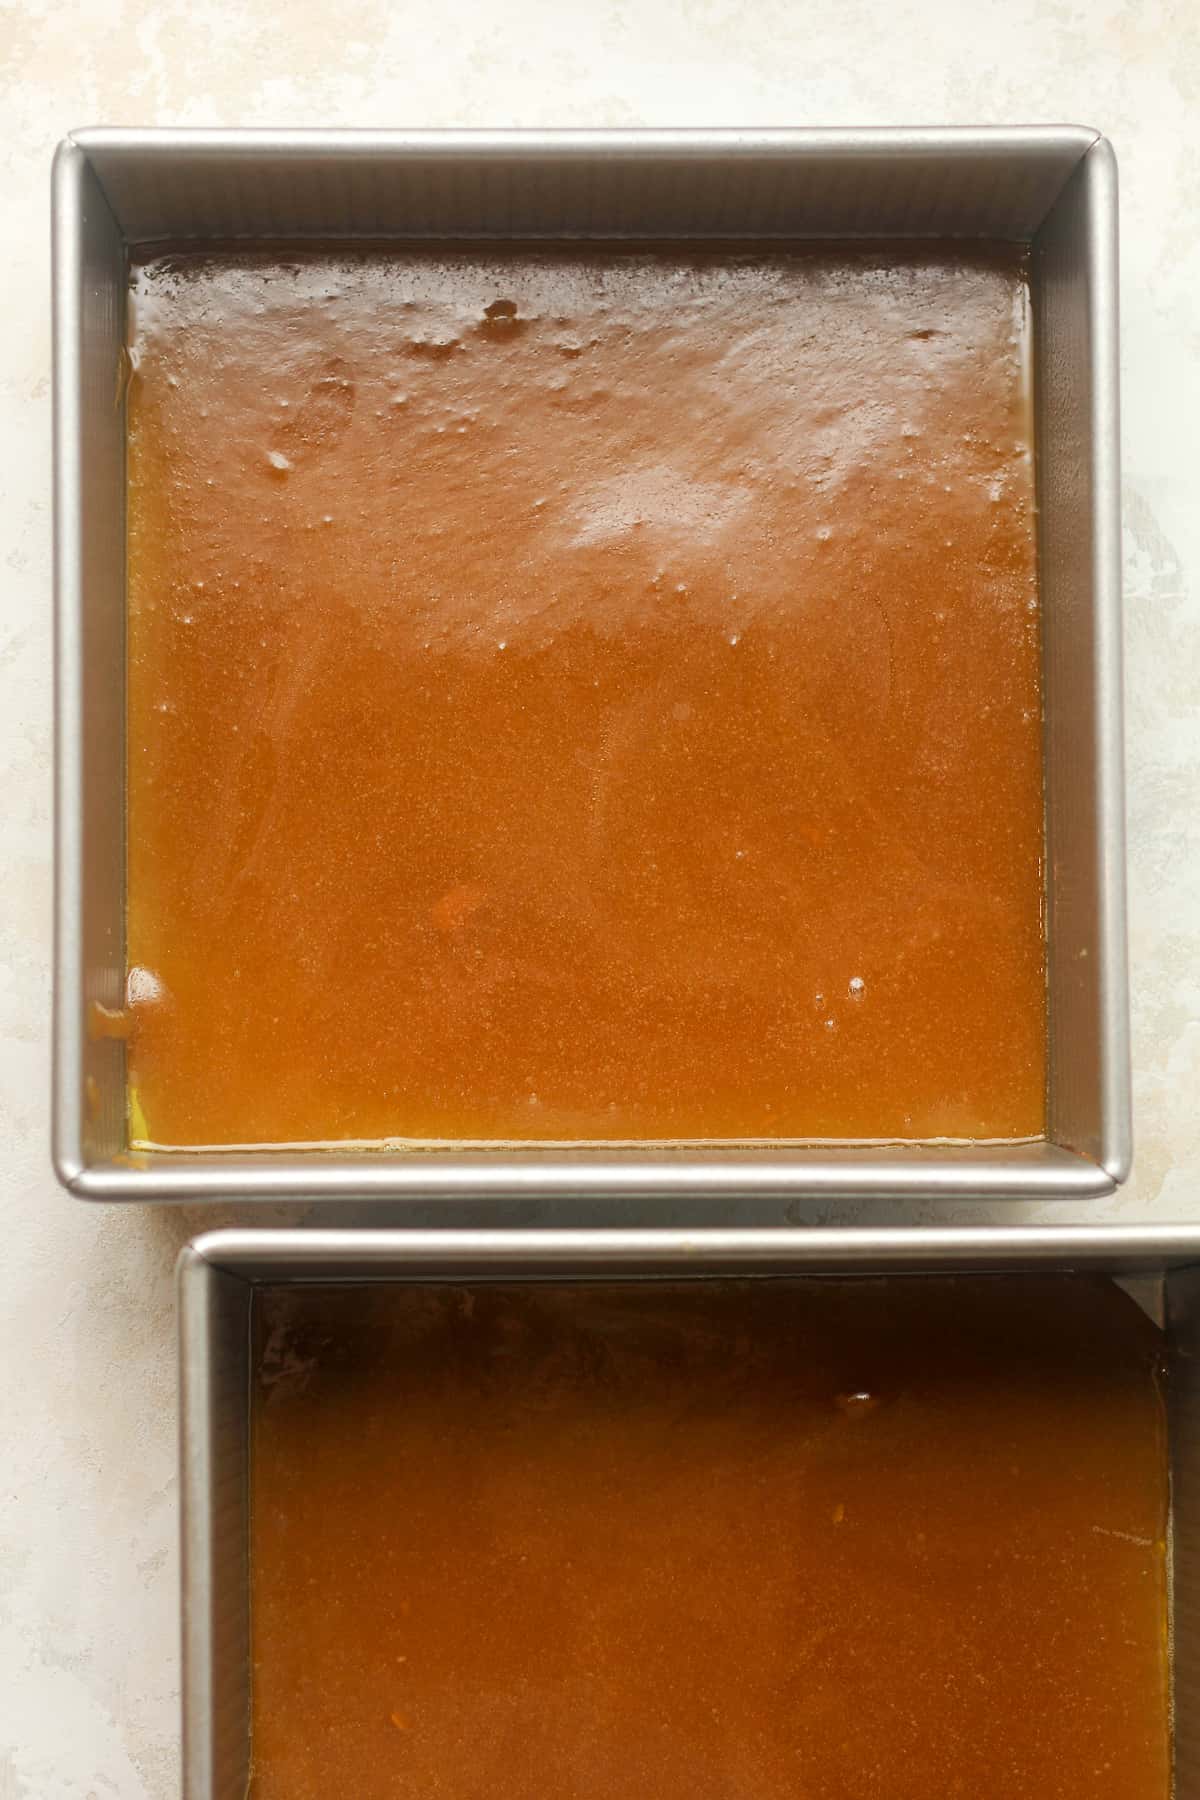 Two square pans of the caramel goo.